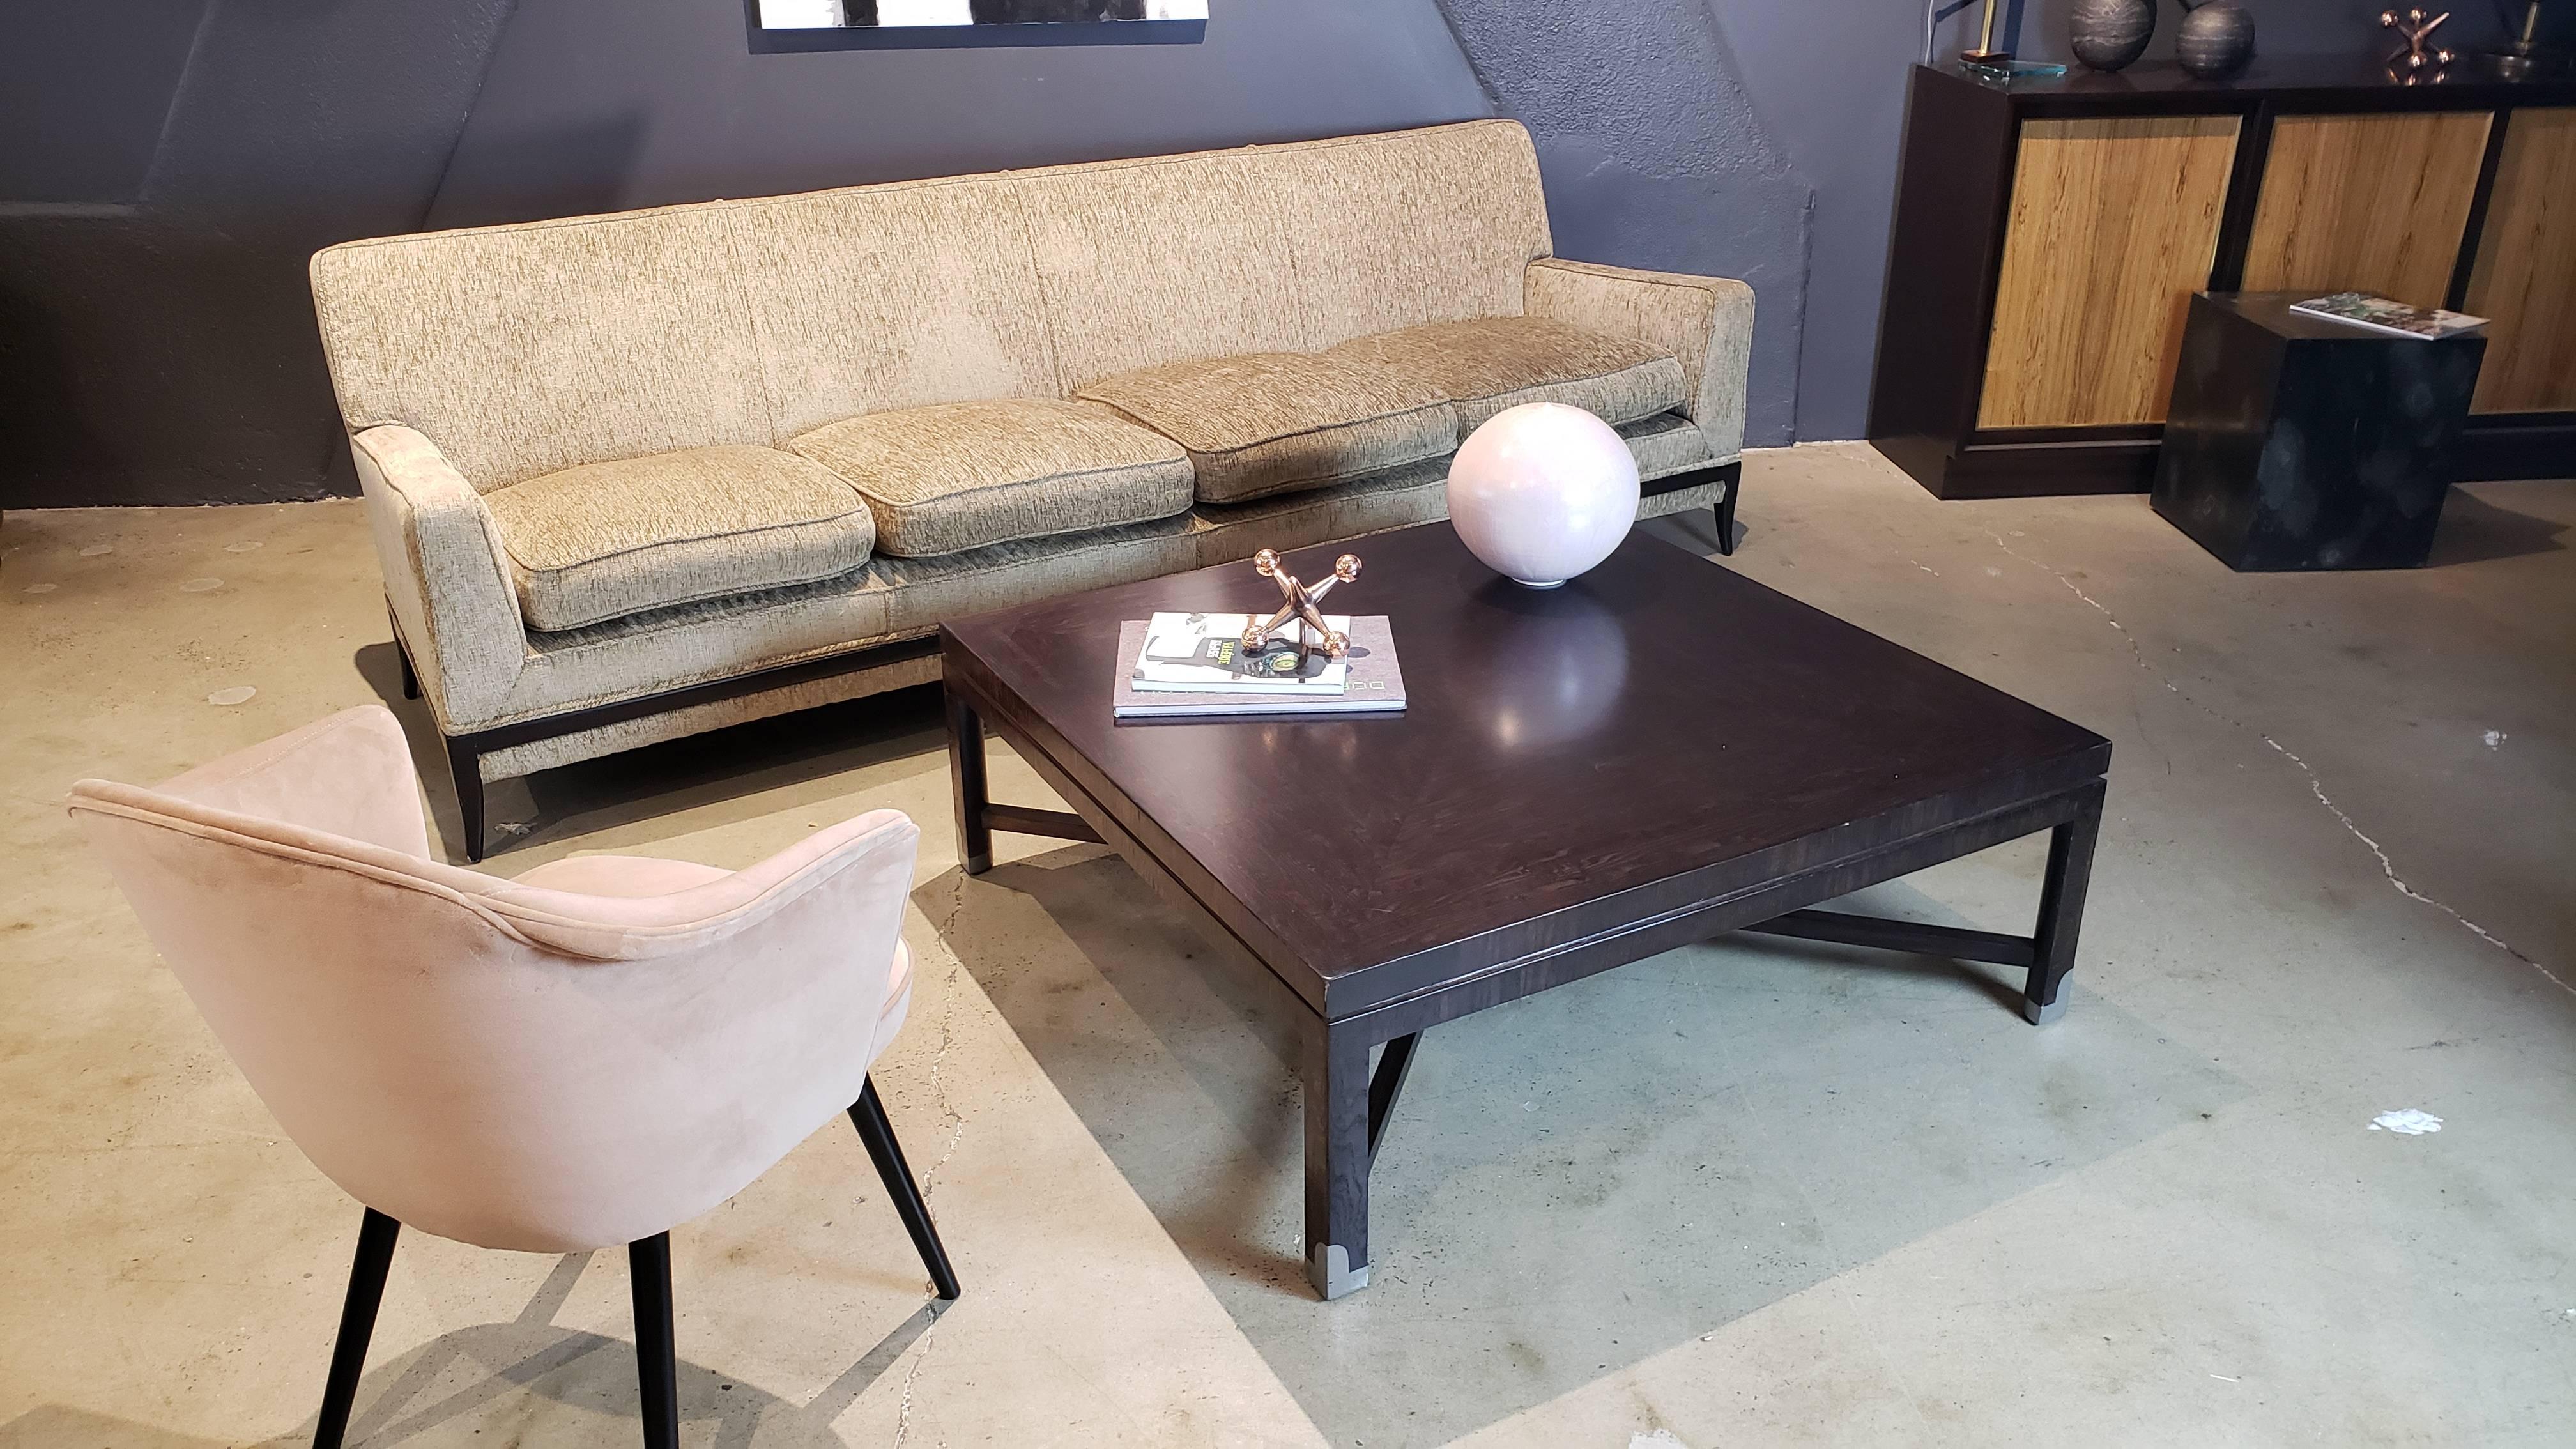 Hard to find Tommi Parzinger sofa with classic midcentury lines, circa 1950. Handsome dark walnut or mahogany decorative stretchers and elegant sabre leg make this piece at home alongside both traditional and modern pieces. Very good vintage